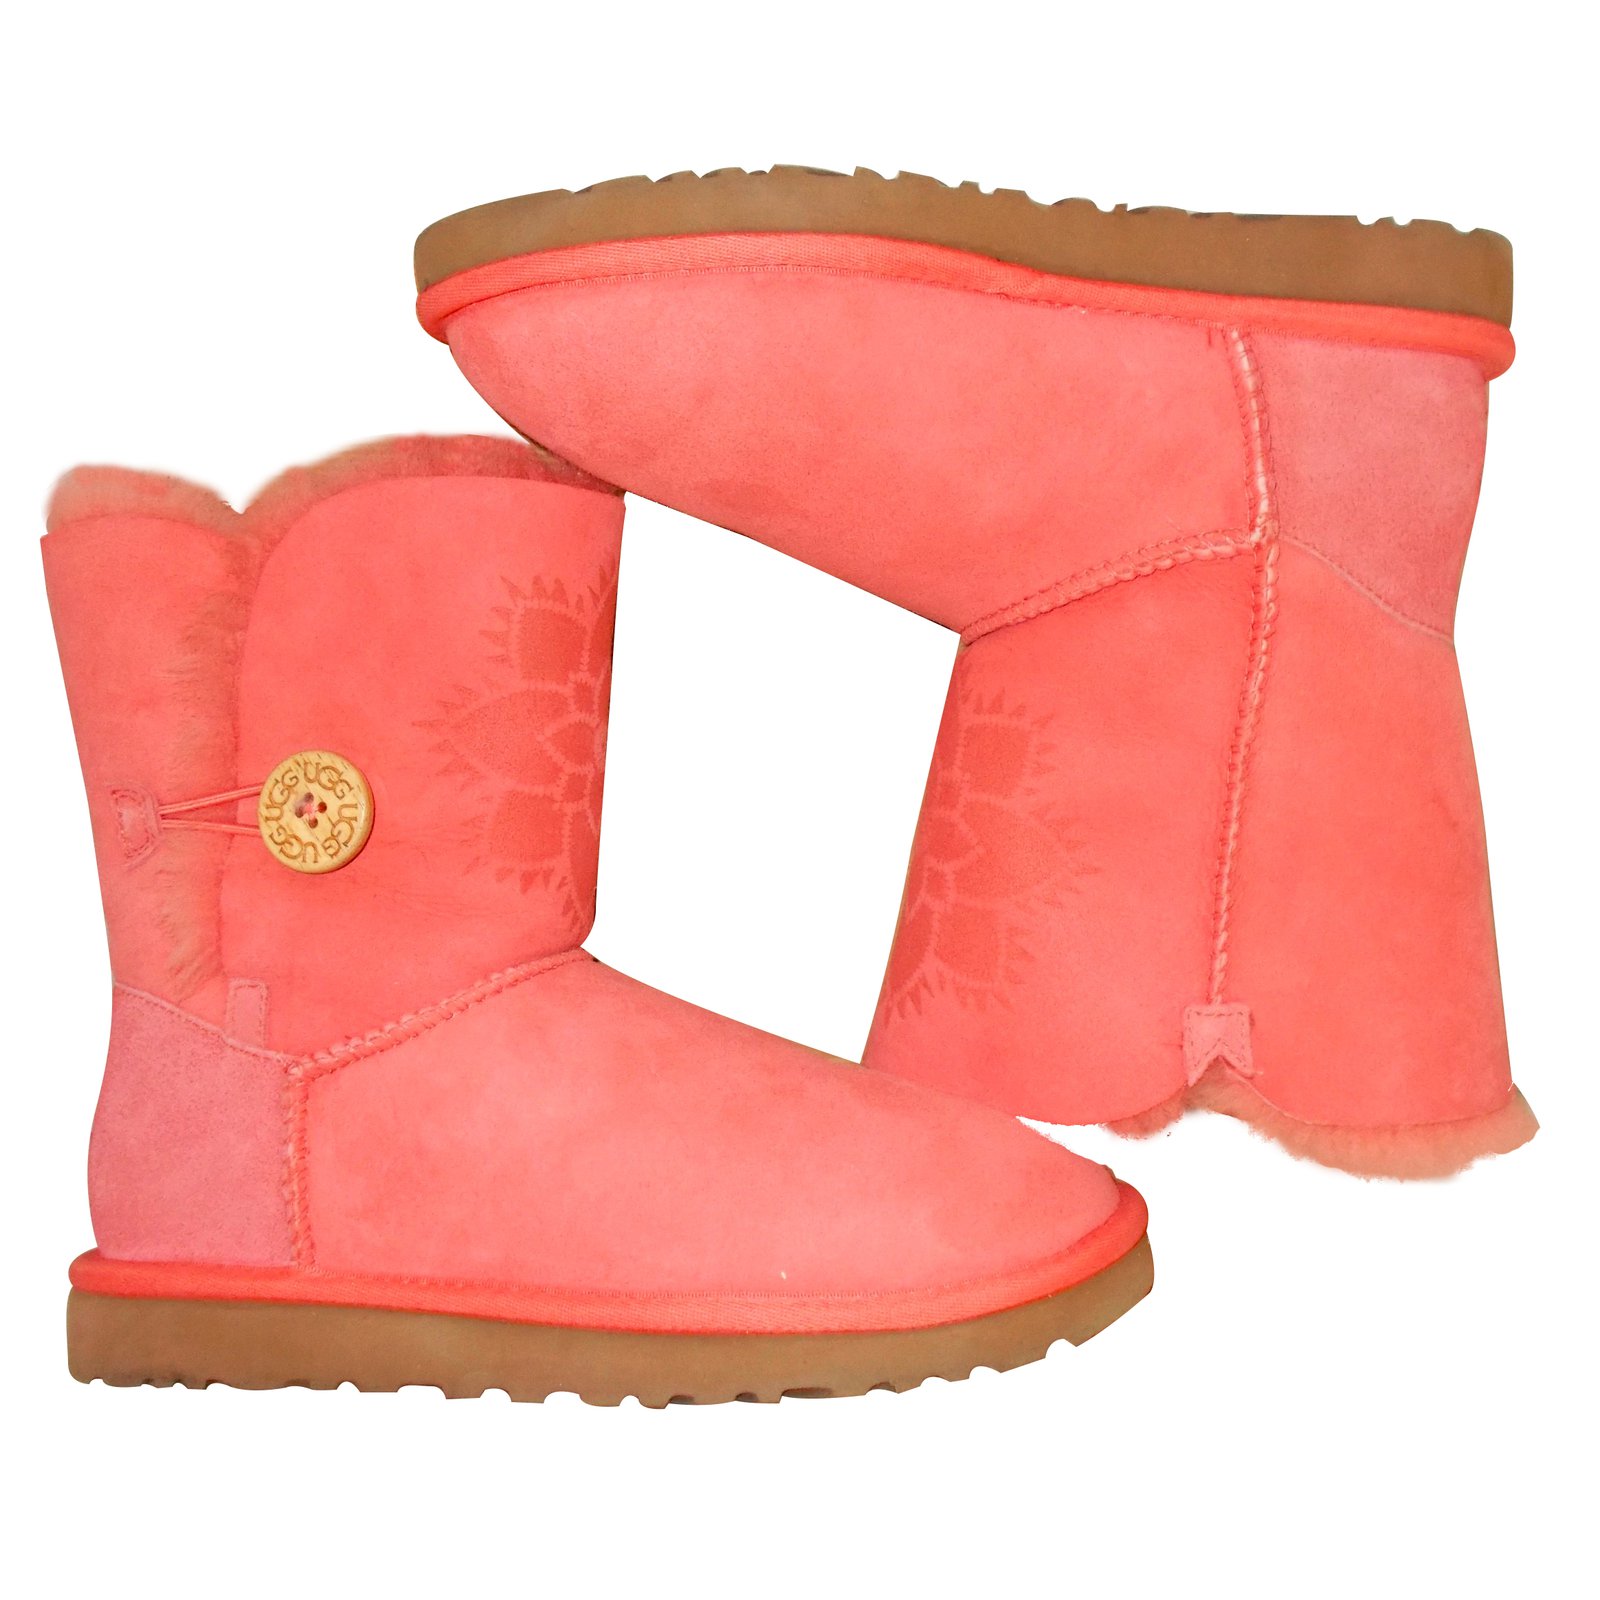 peach color ugg boots